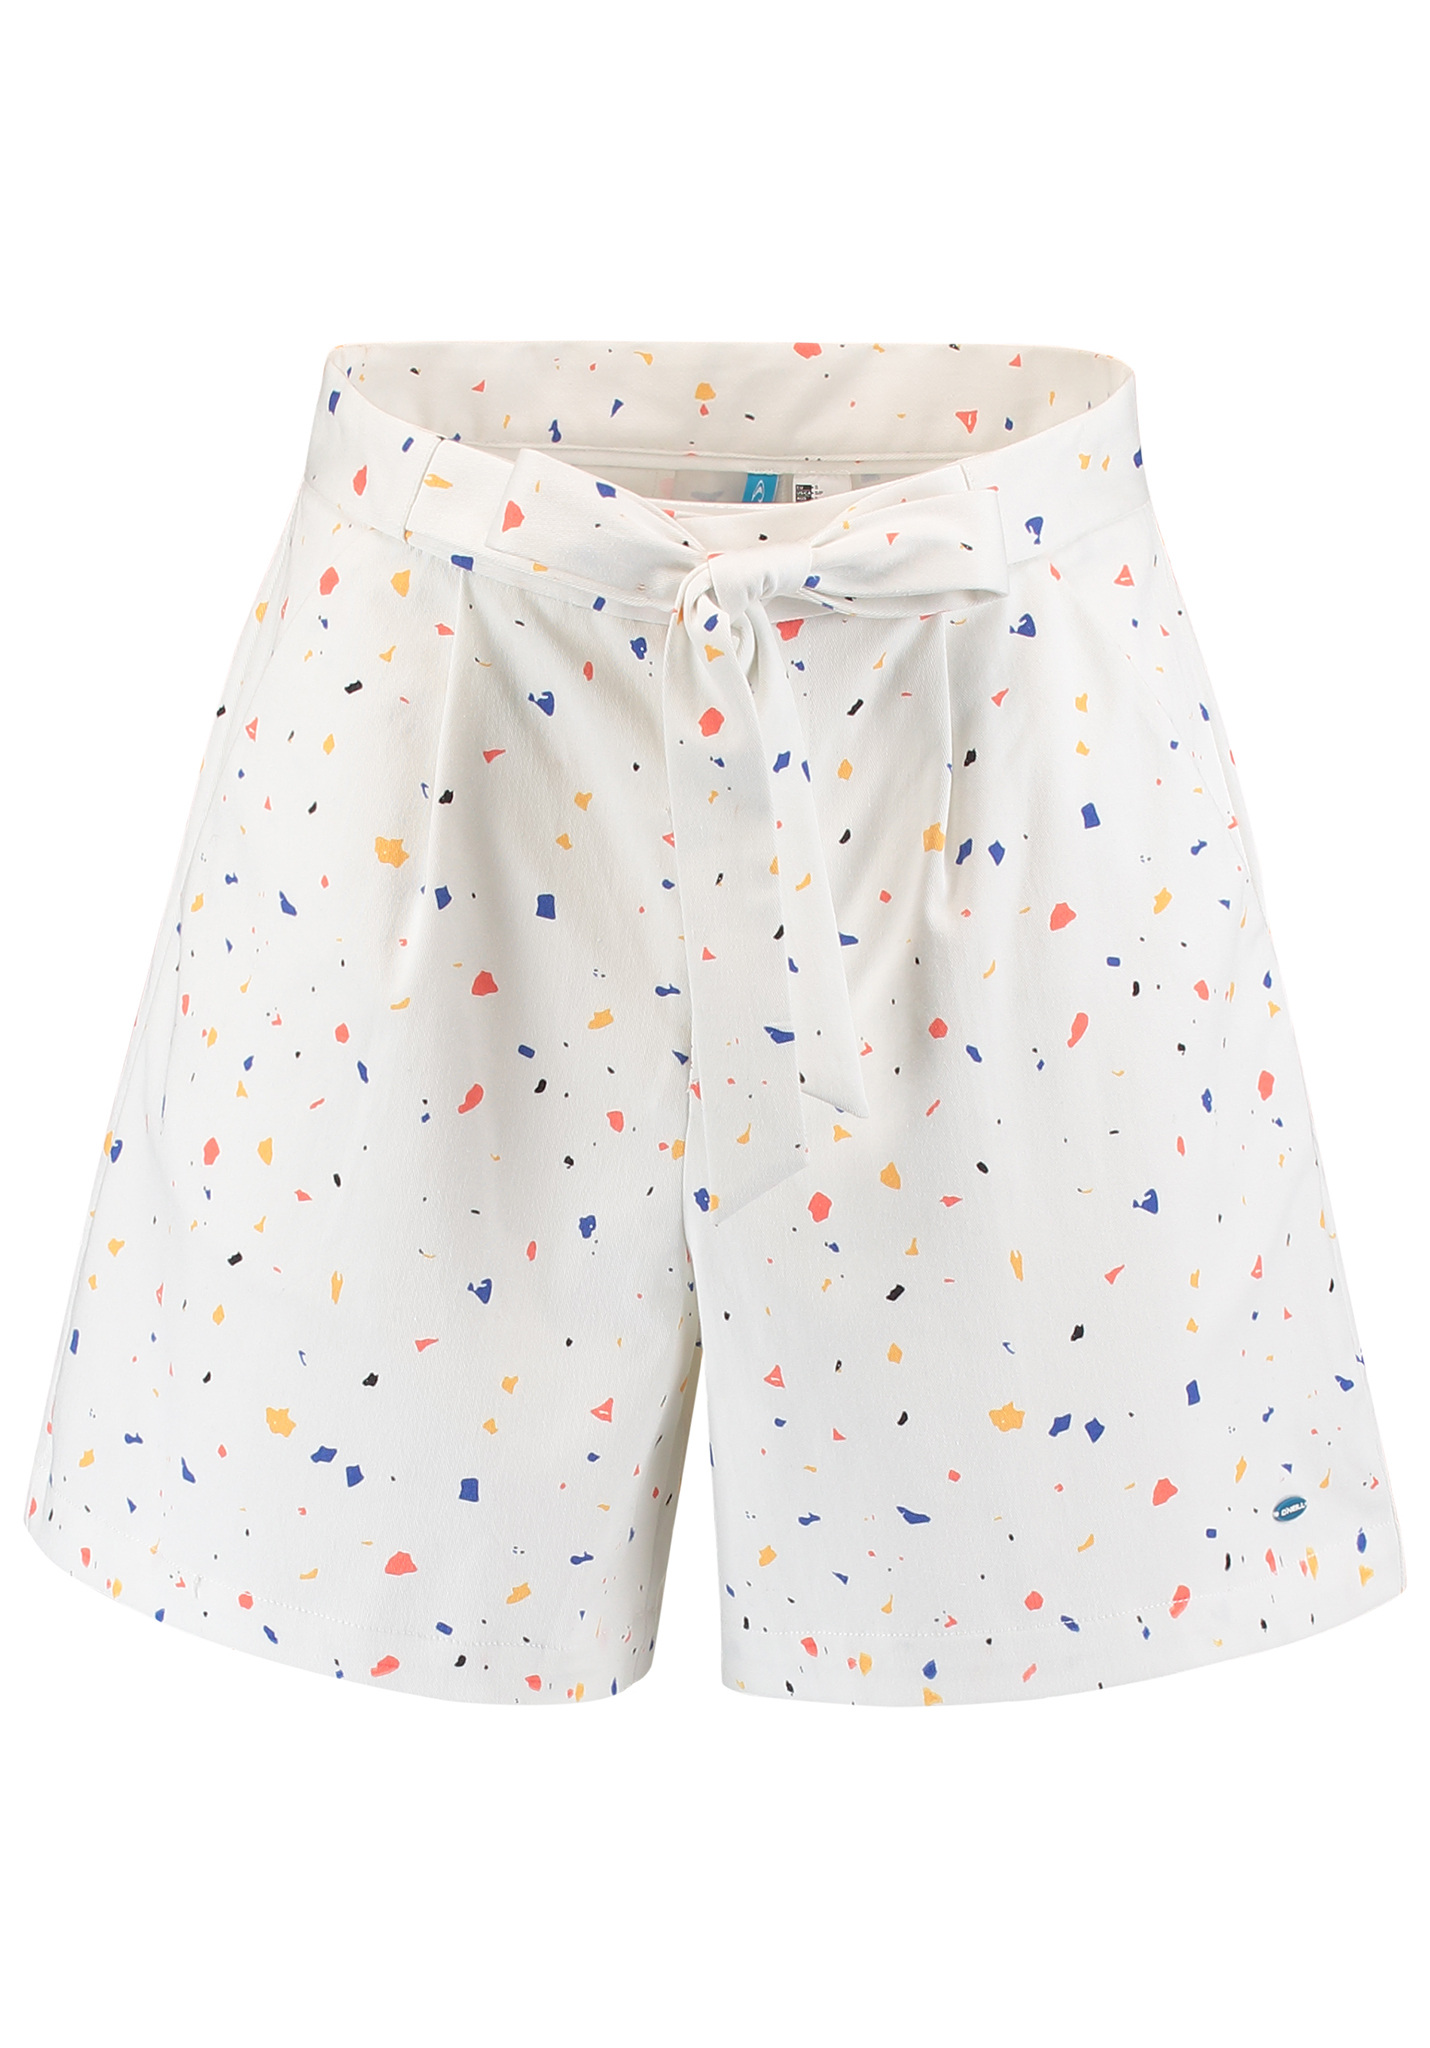 O'Neill Ocean Mission Chino Shorts weiß aop m/rot M